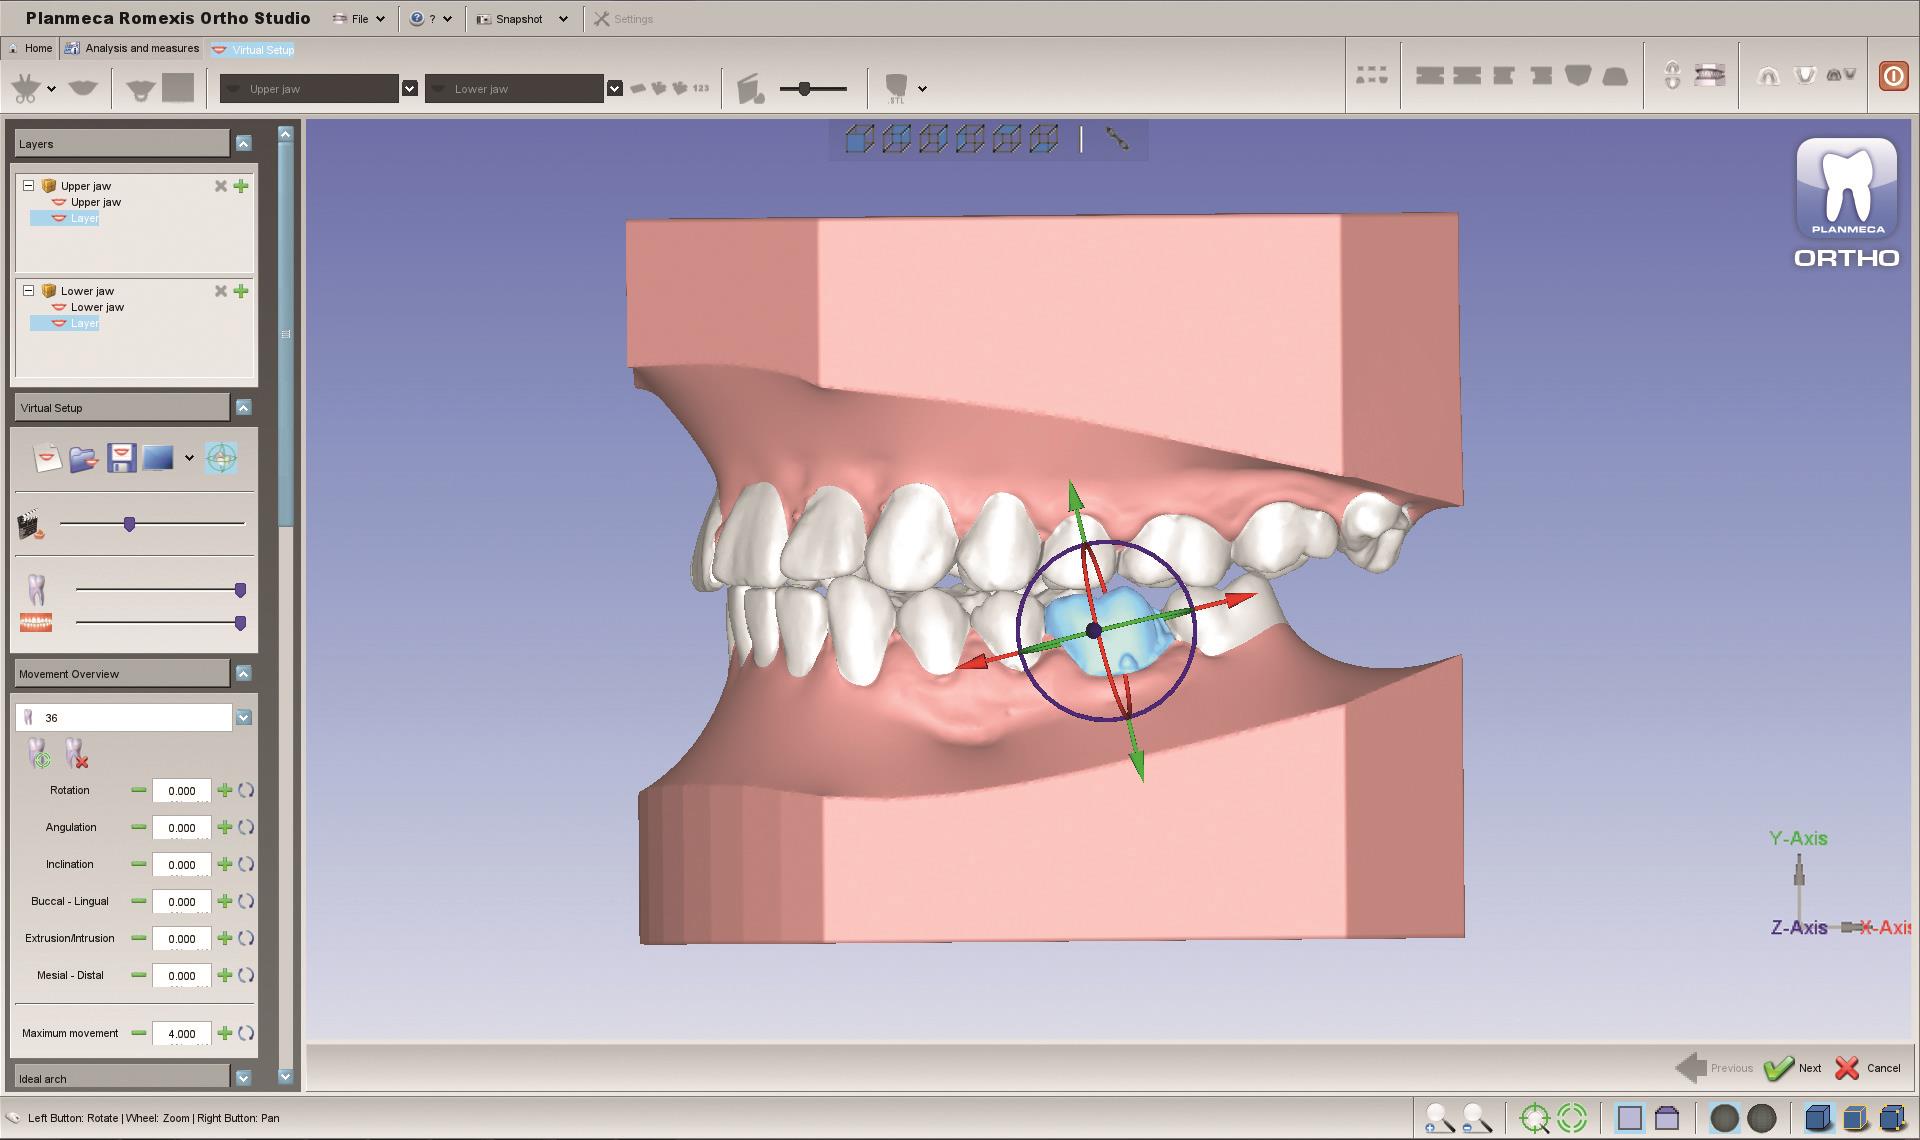 Planmeca introduces new 3D tools for orthodontists and dental labs